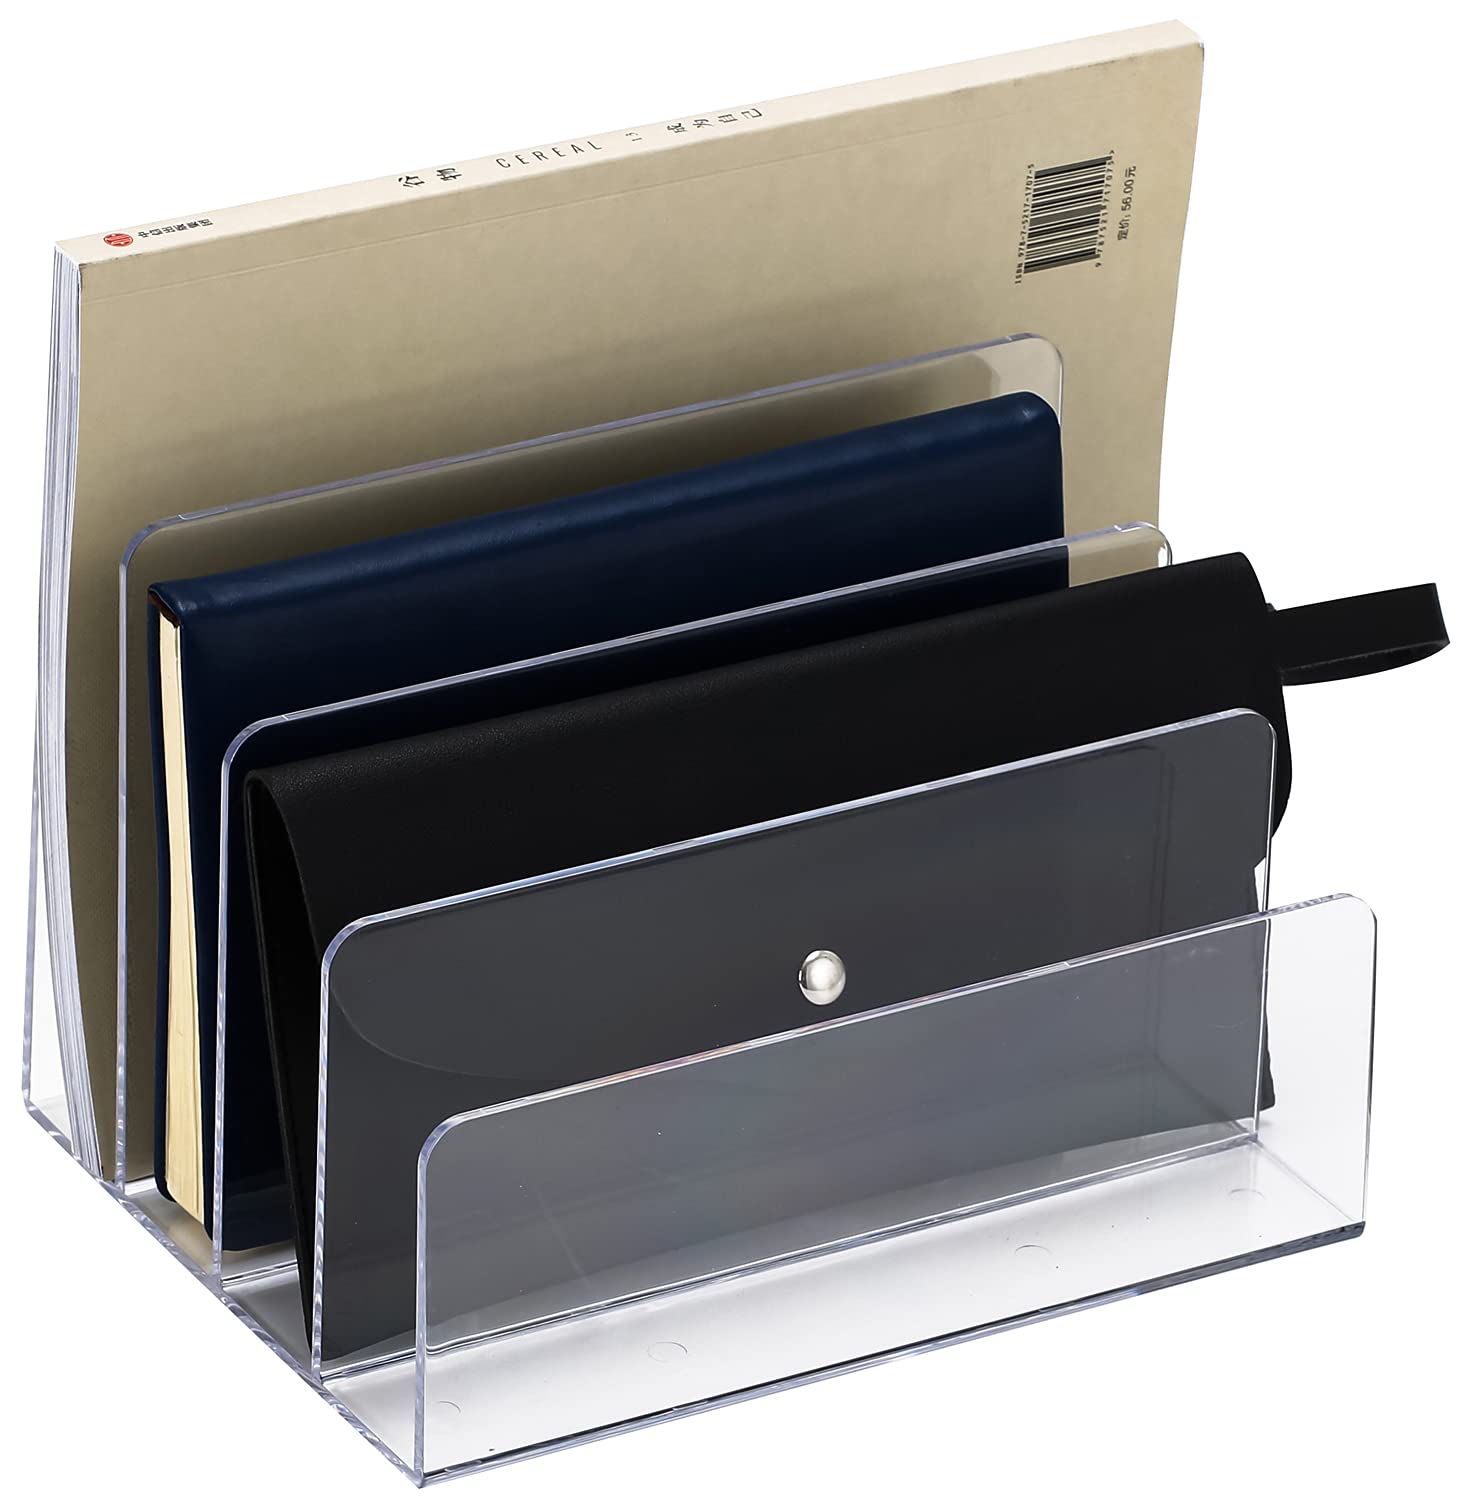 Sooyee File Organizer for Desk, Mail Organizer Countertop,4-Section File Holder for Home Office,Book Organizer,Acrylic Desk Organizer for Letter, Document, Notebook, Binder, Purse, Palette,Clear